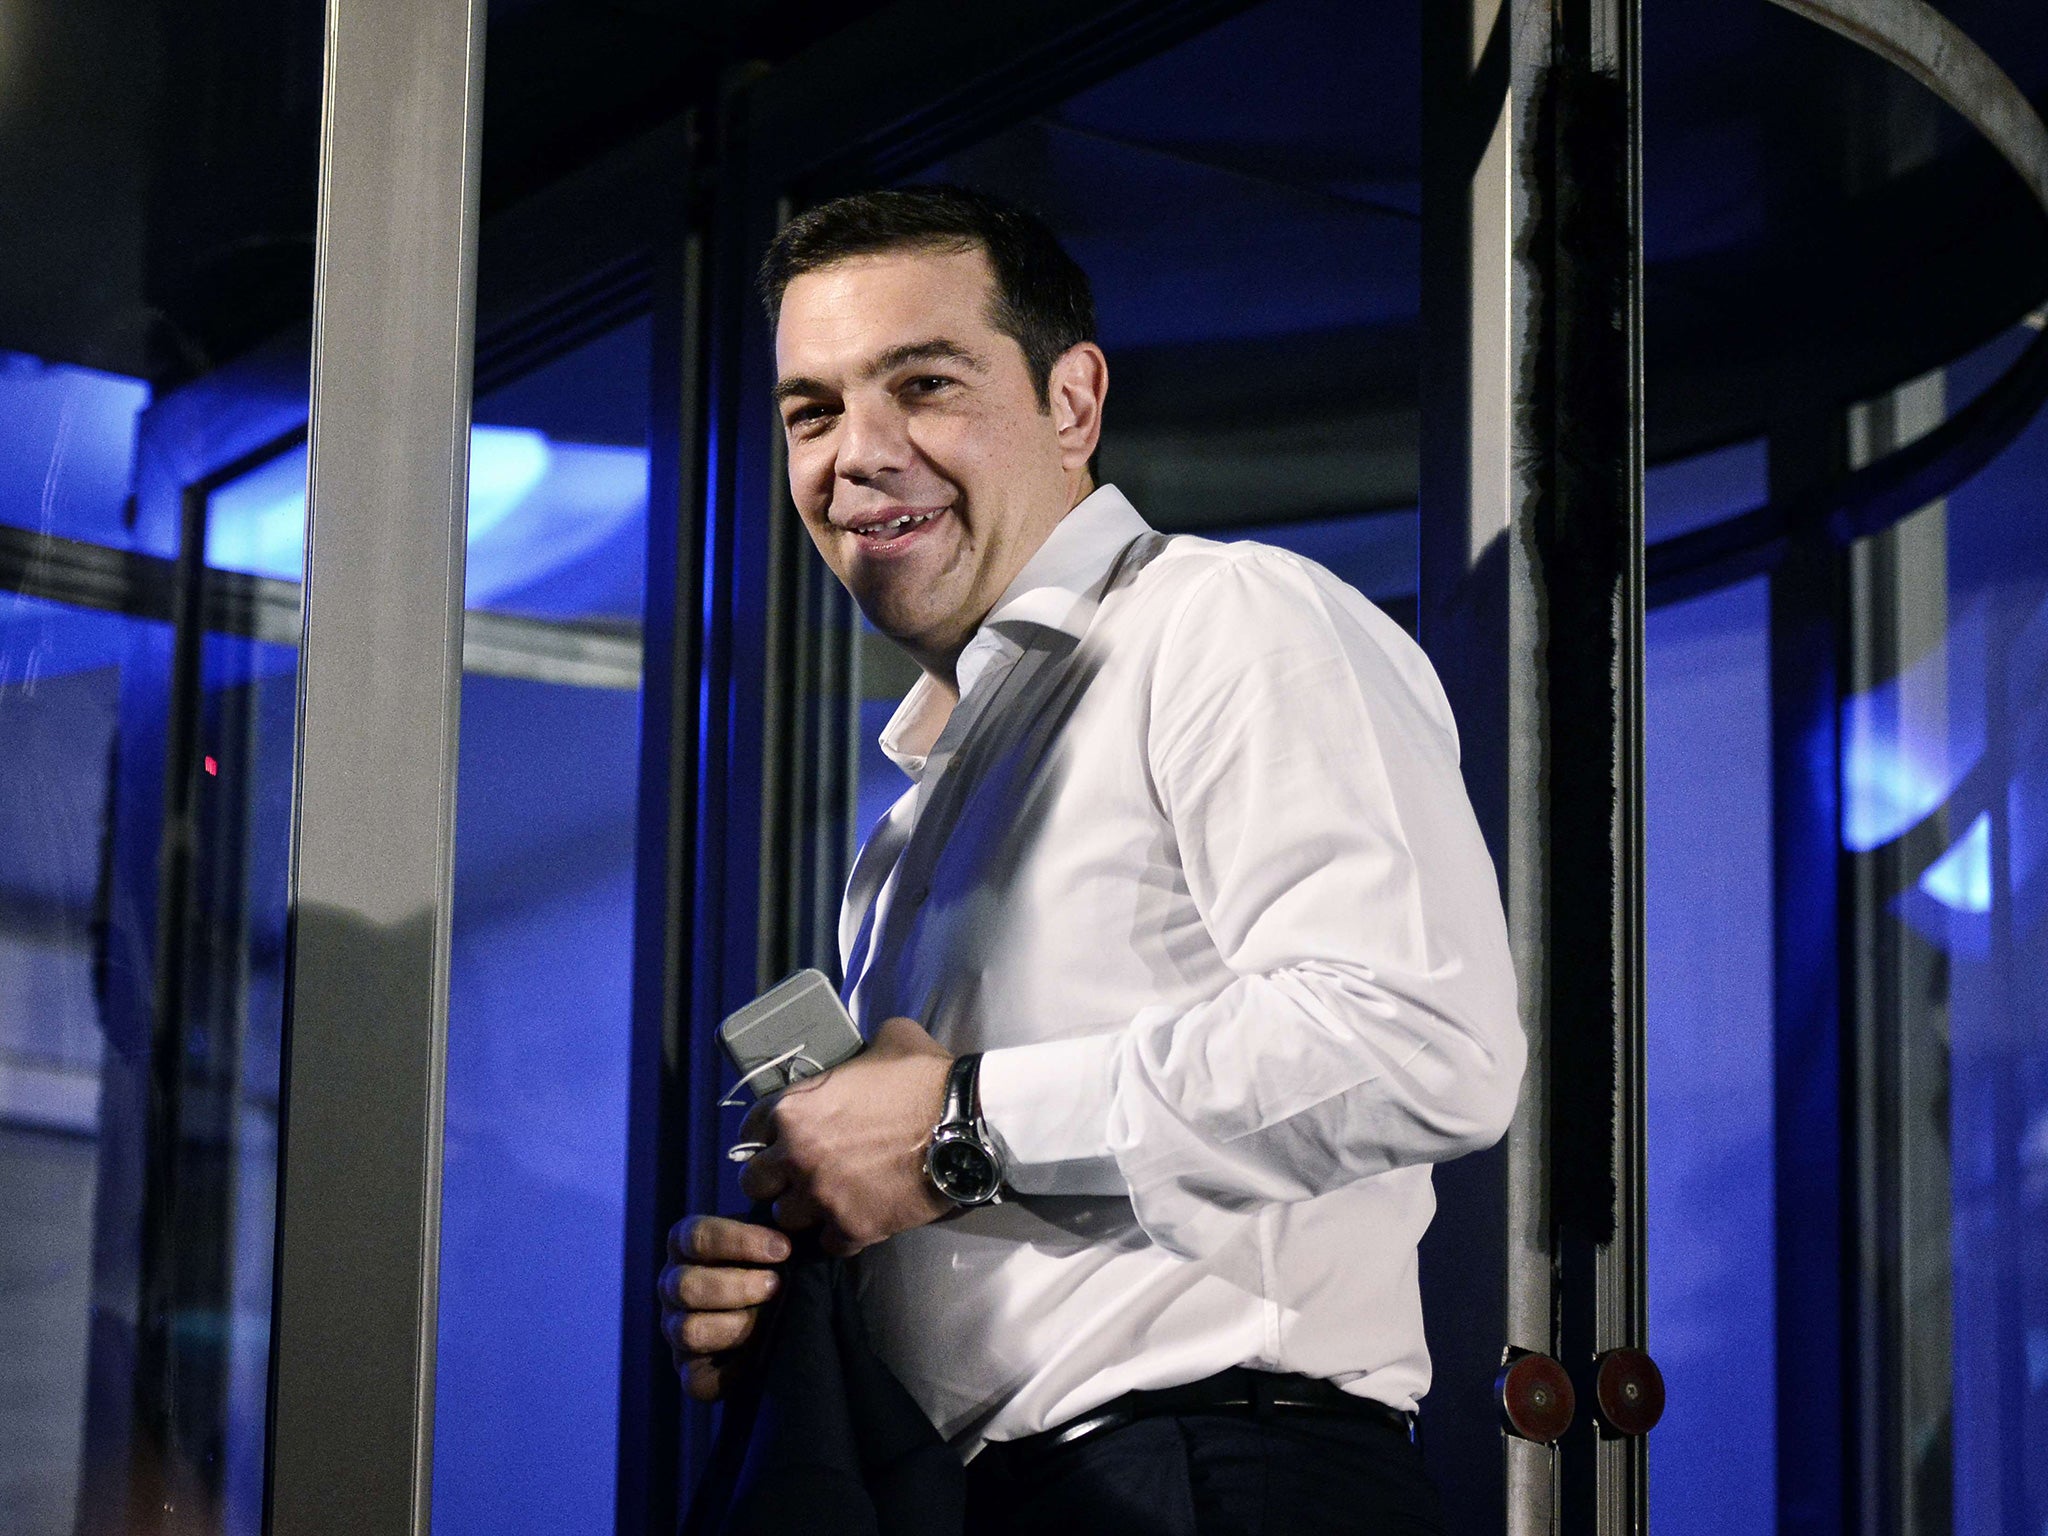 Former Greek Prime Minister and leader of Syriza Alexis Tsipras is neck and neck with the right-wing Vangelis Meimarakis